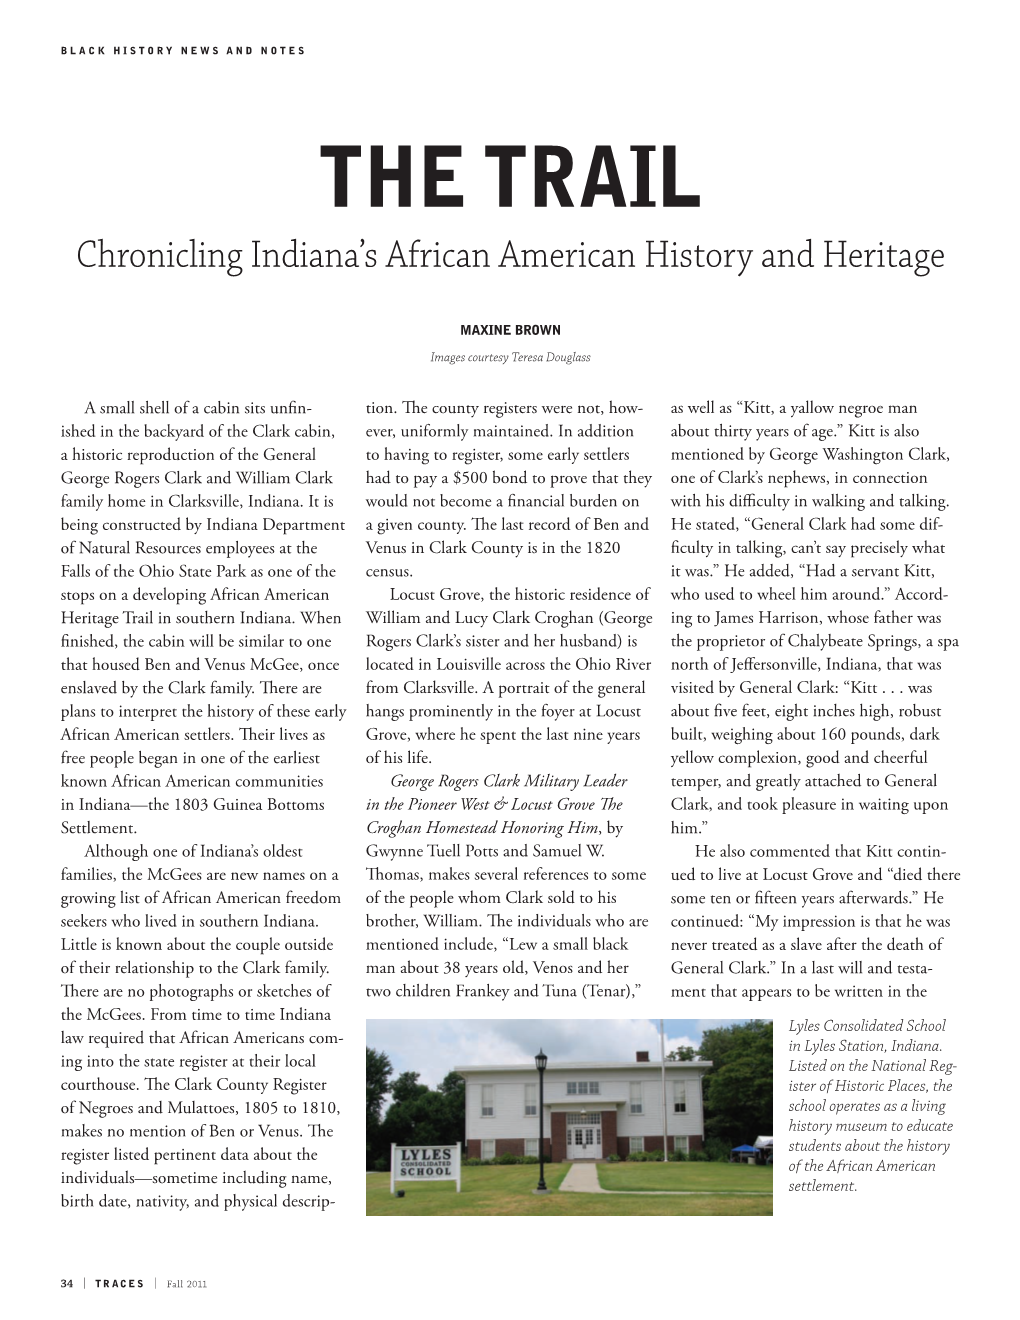 THE TRAIL Chronicling Indiana’S African American History and Heritage